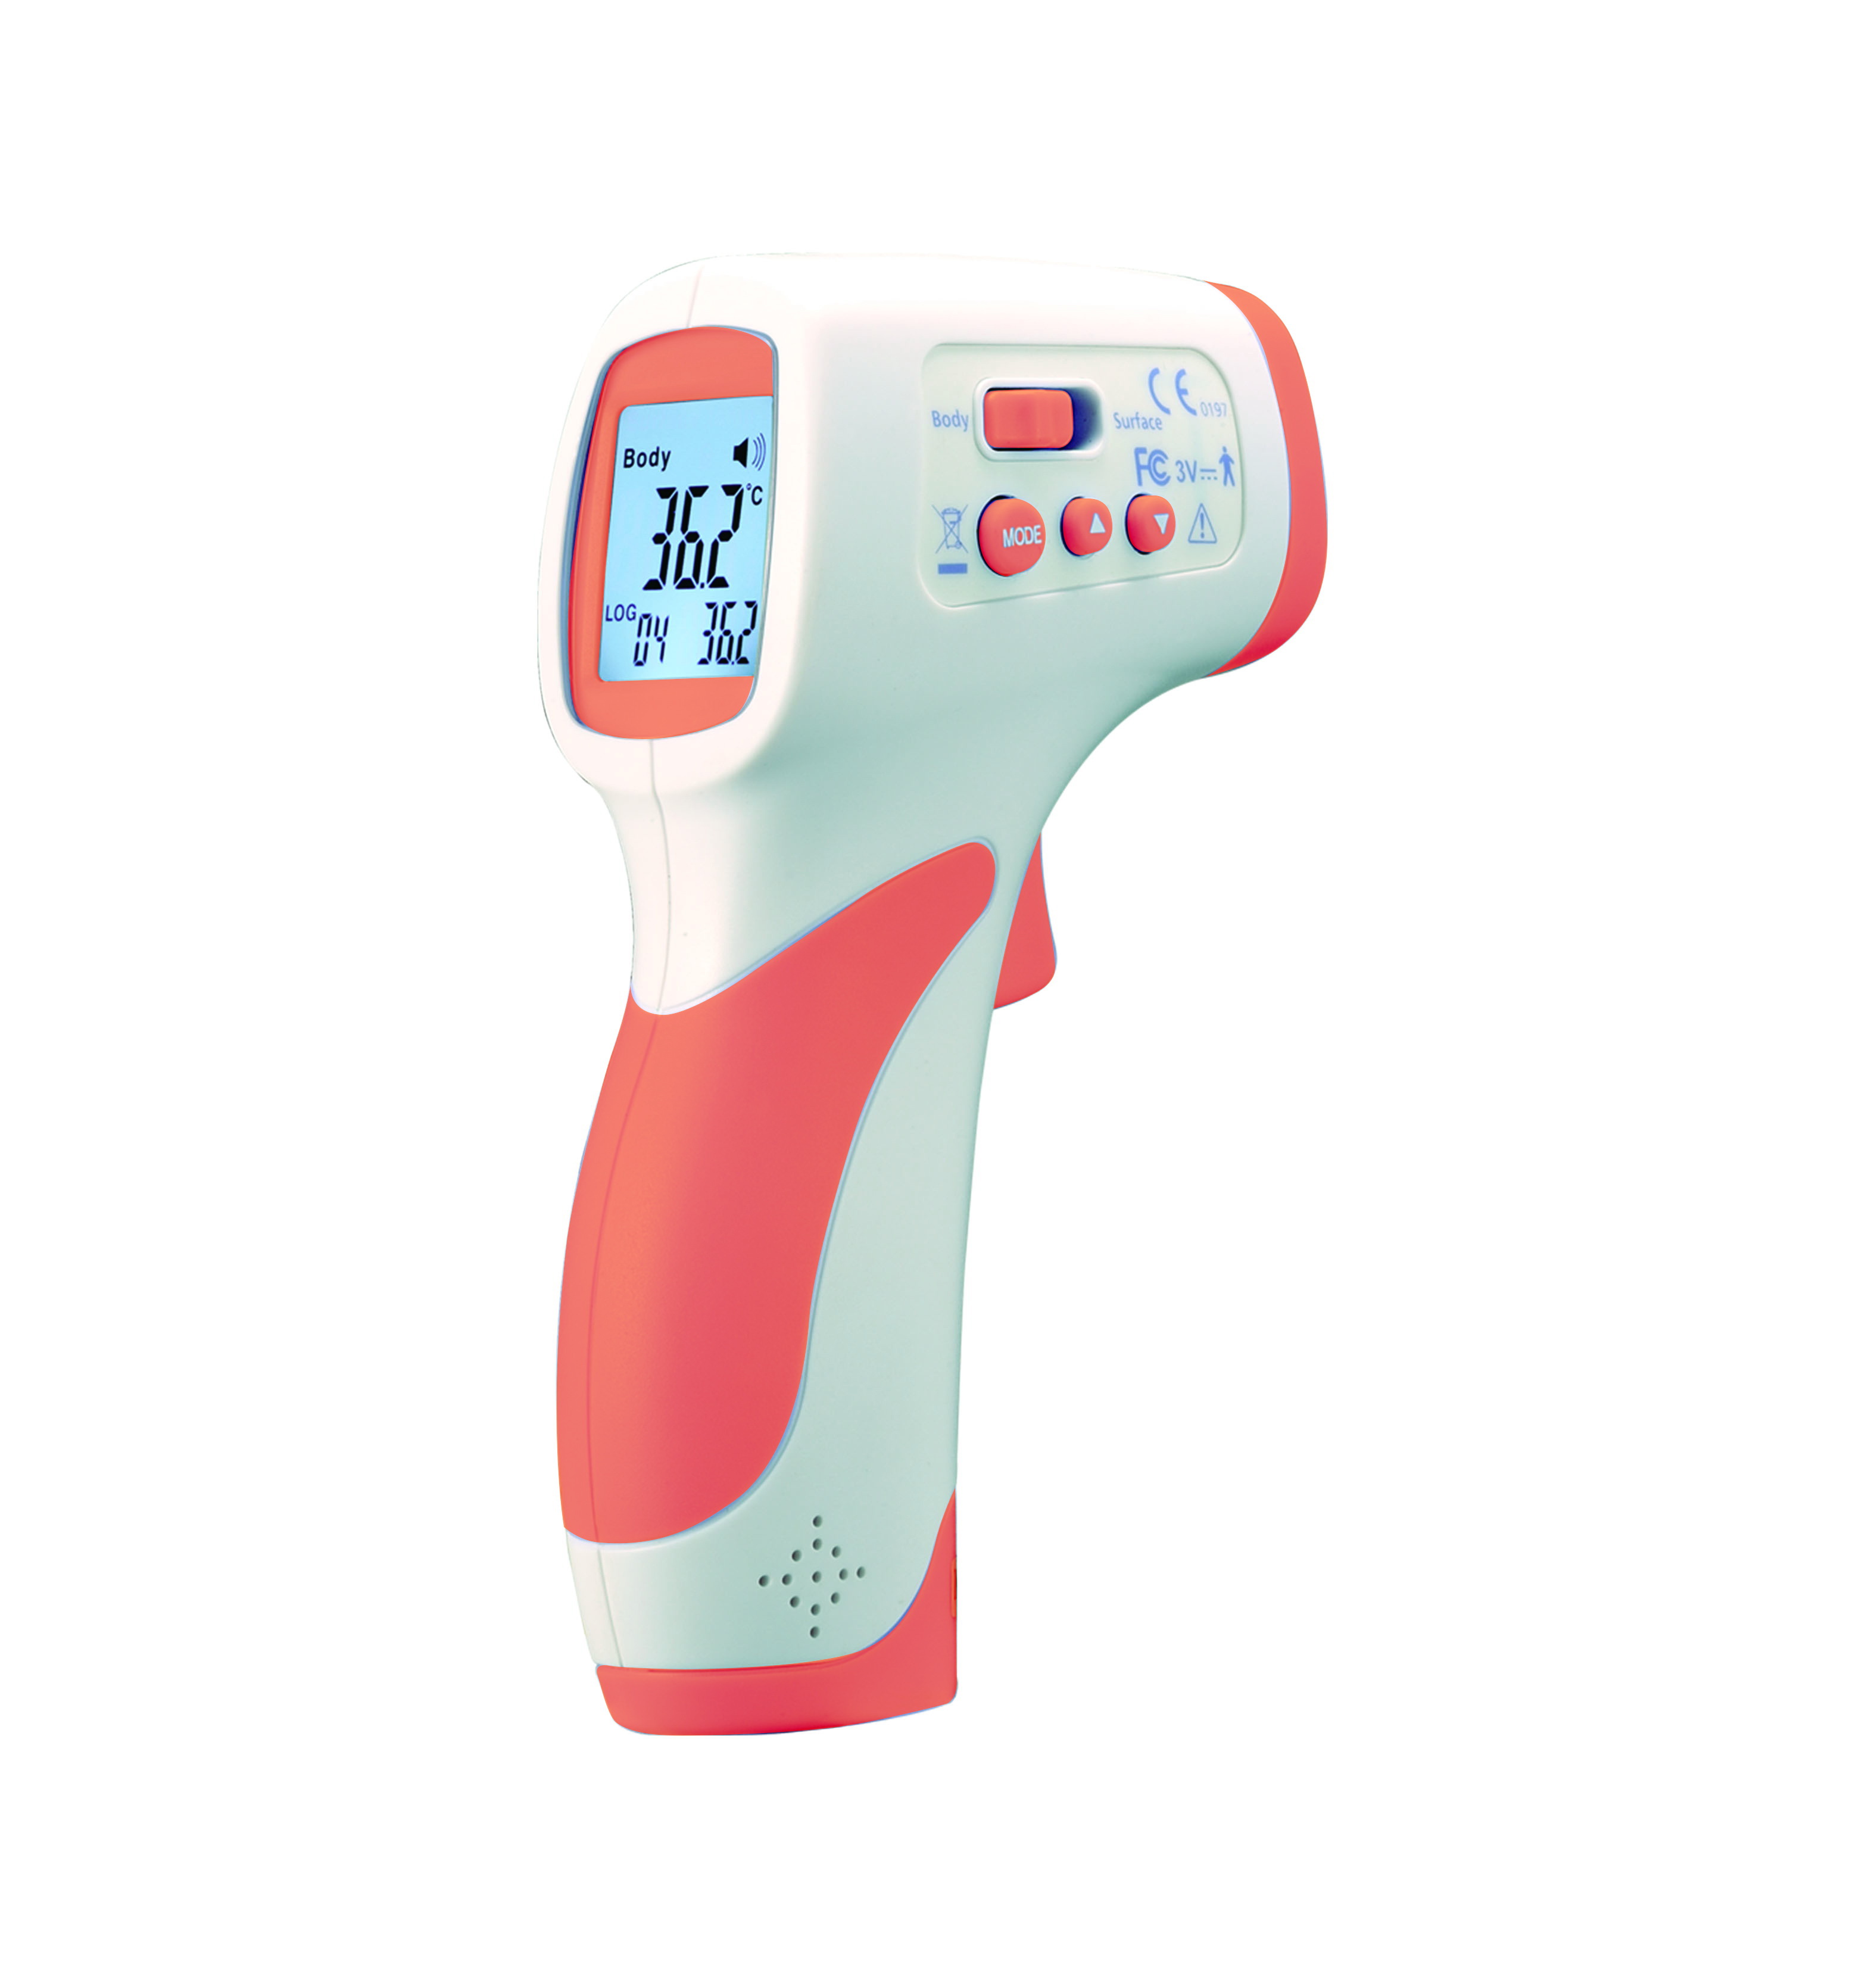 ZI-9660 Body Infrared Thermometer